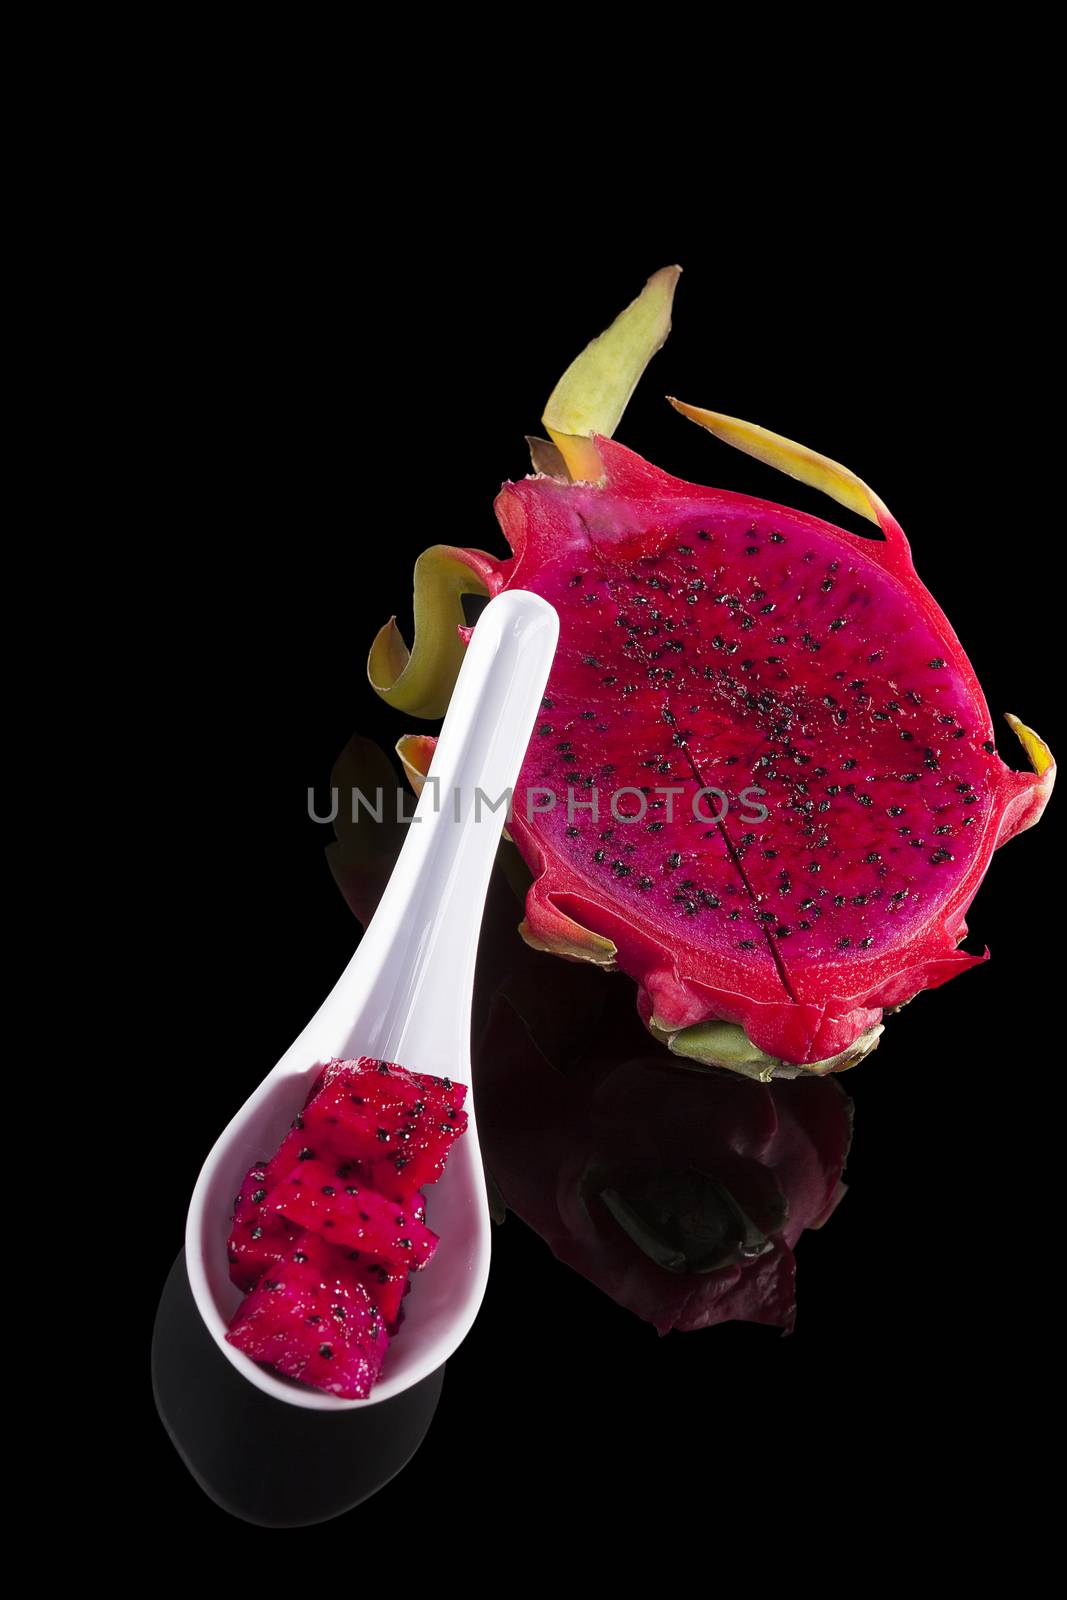 Dragon fruit pieces on spoon isolated on black background. Tropical fruit salad.